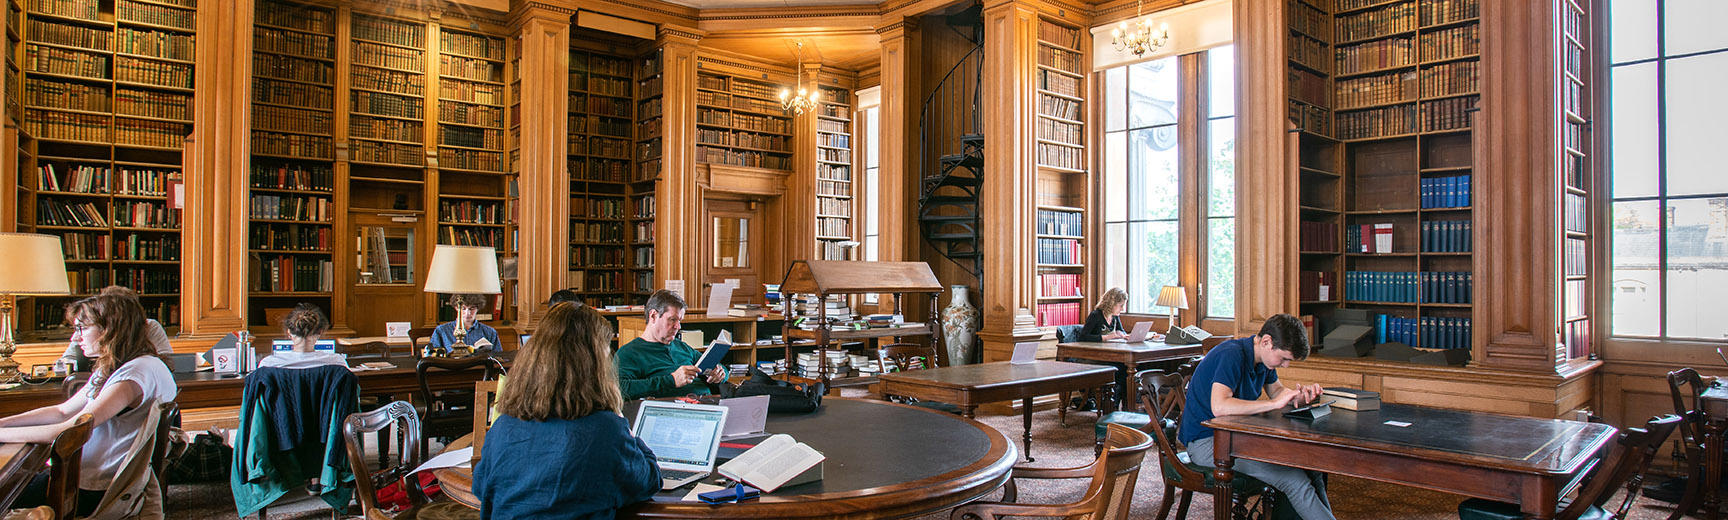 Students sit at individual desks in a wood-panelled room with bookselves